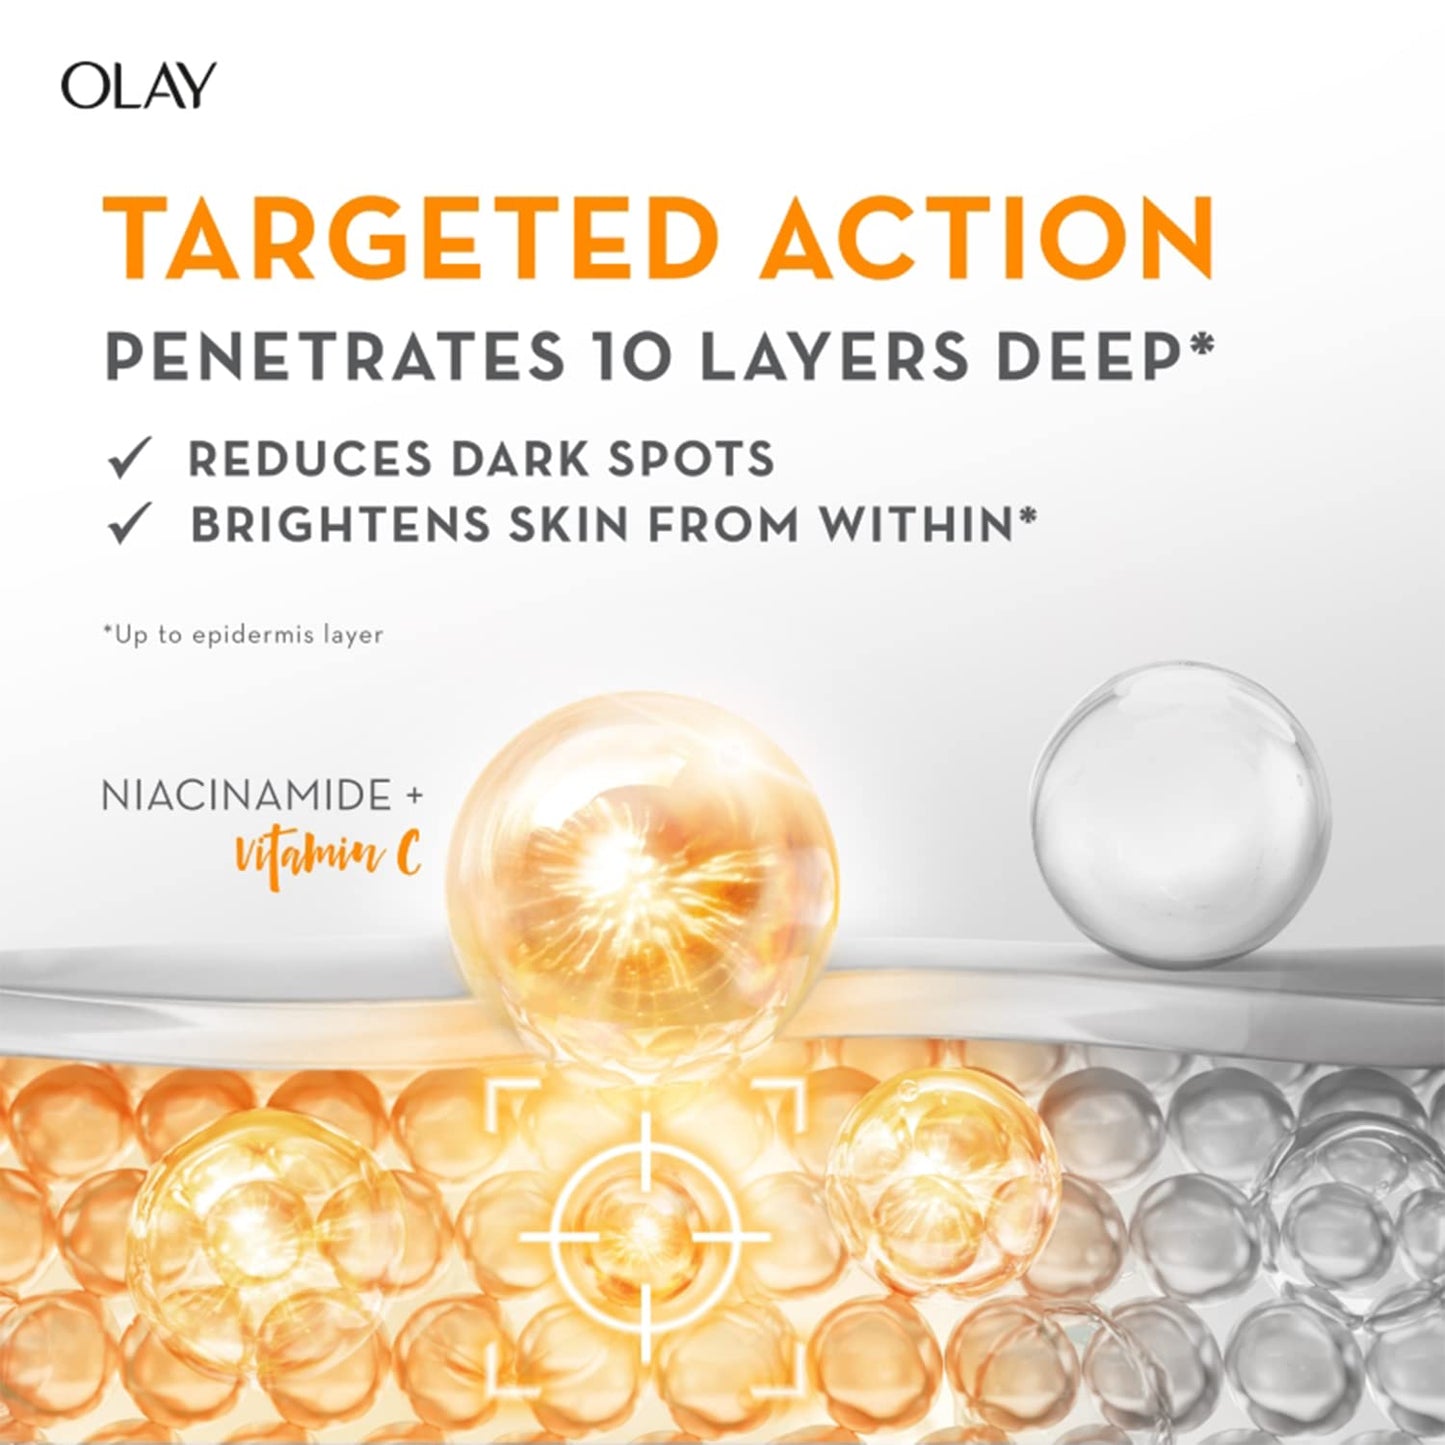 Olay Vitamin C Kit for 2X Glow, Dark Spot Reduction, with Free Cleanser